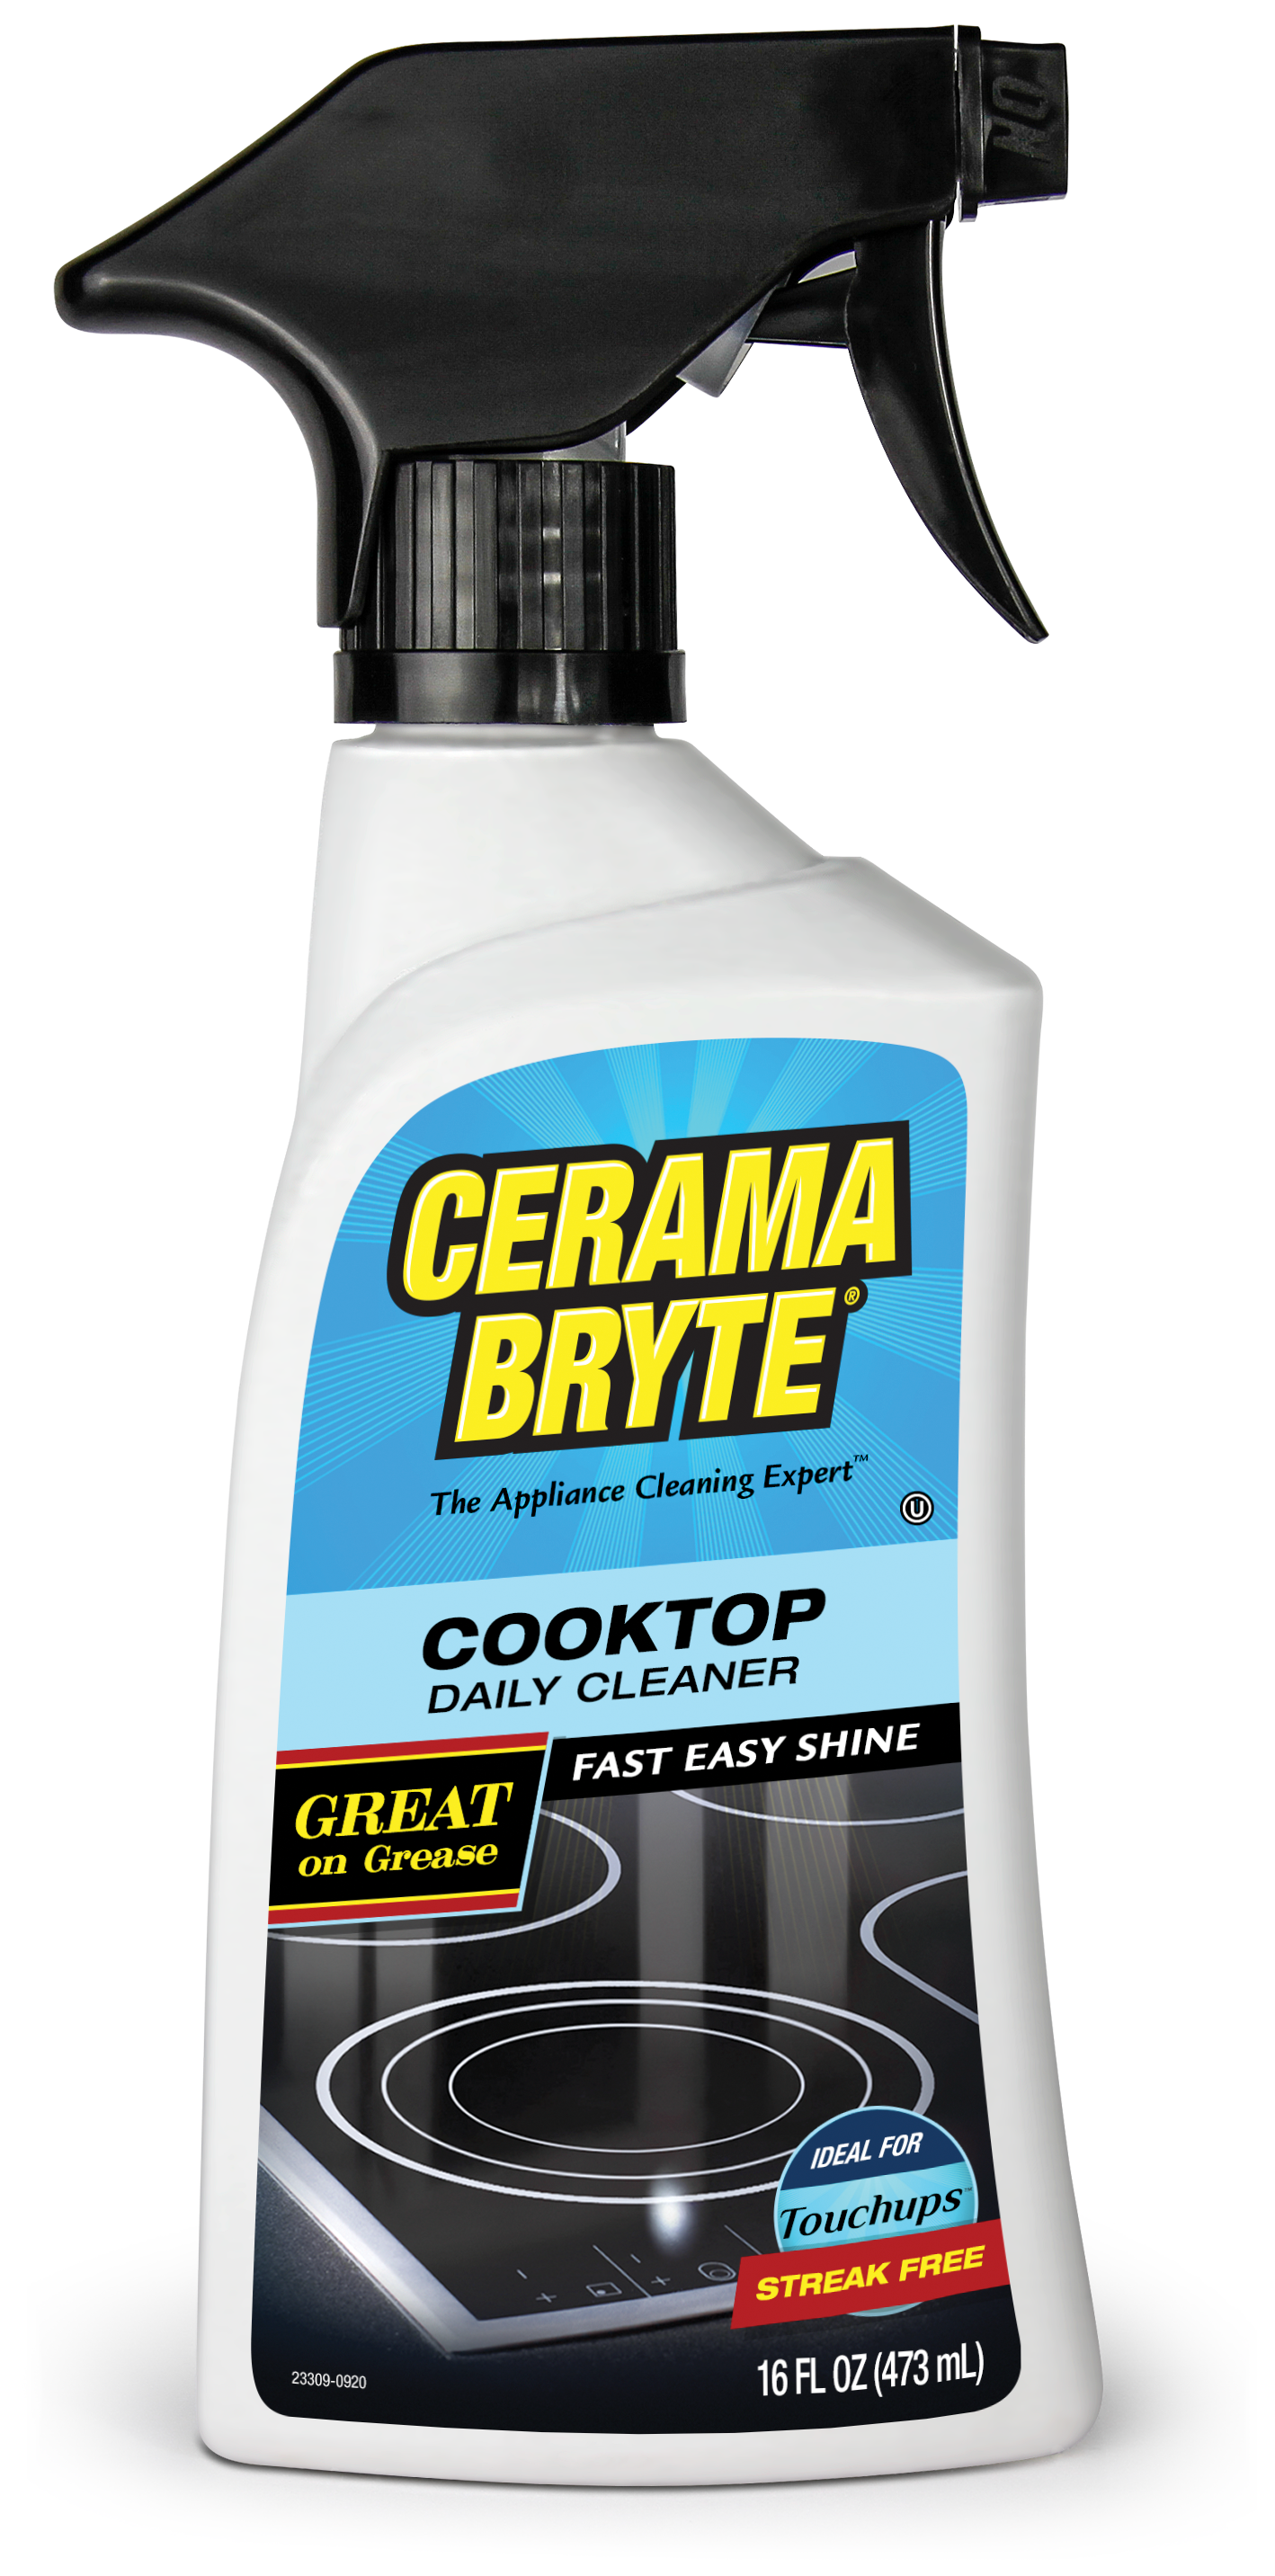 Cooktop Daily Cleaner - Cerama Bryte